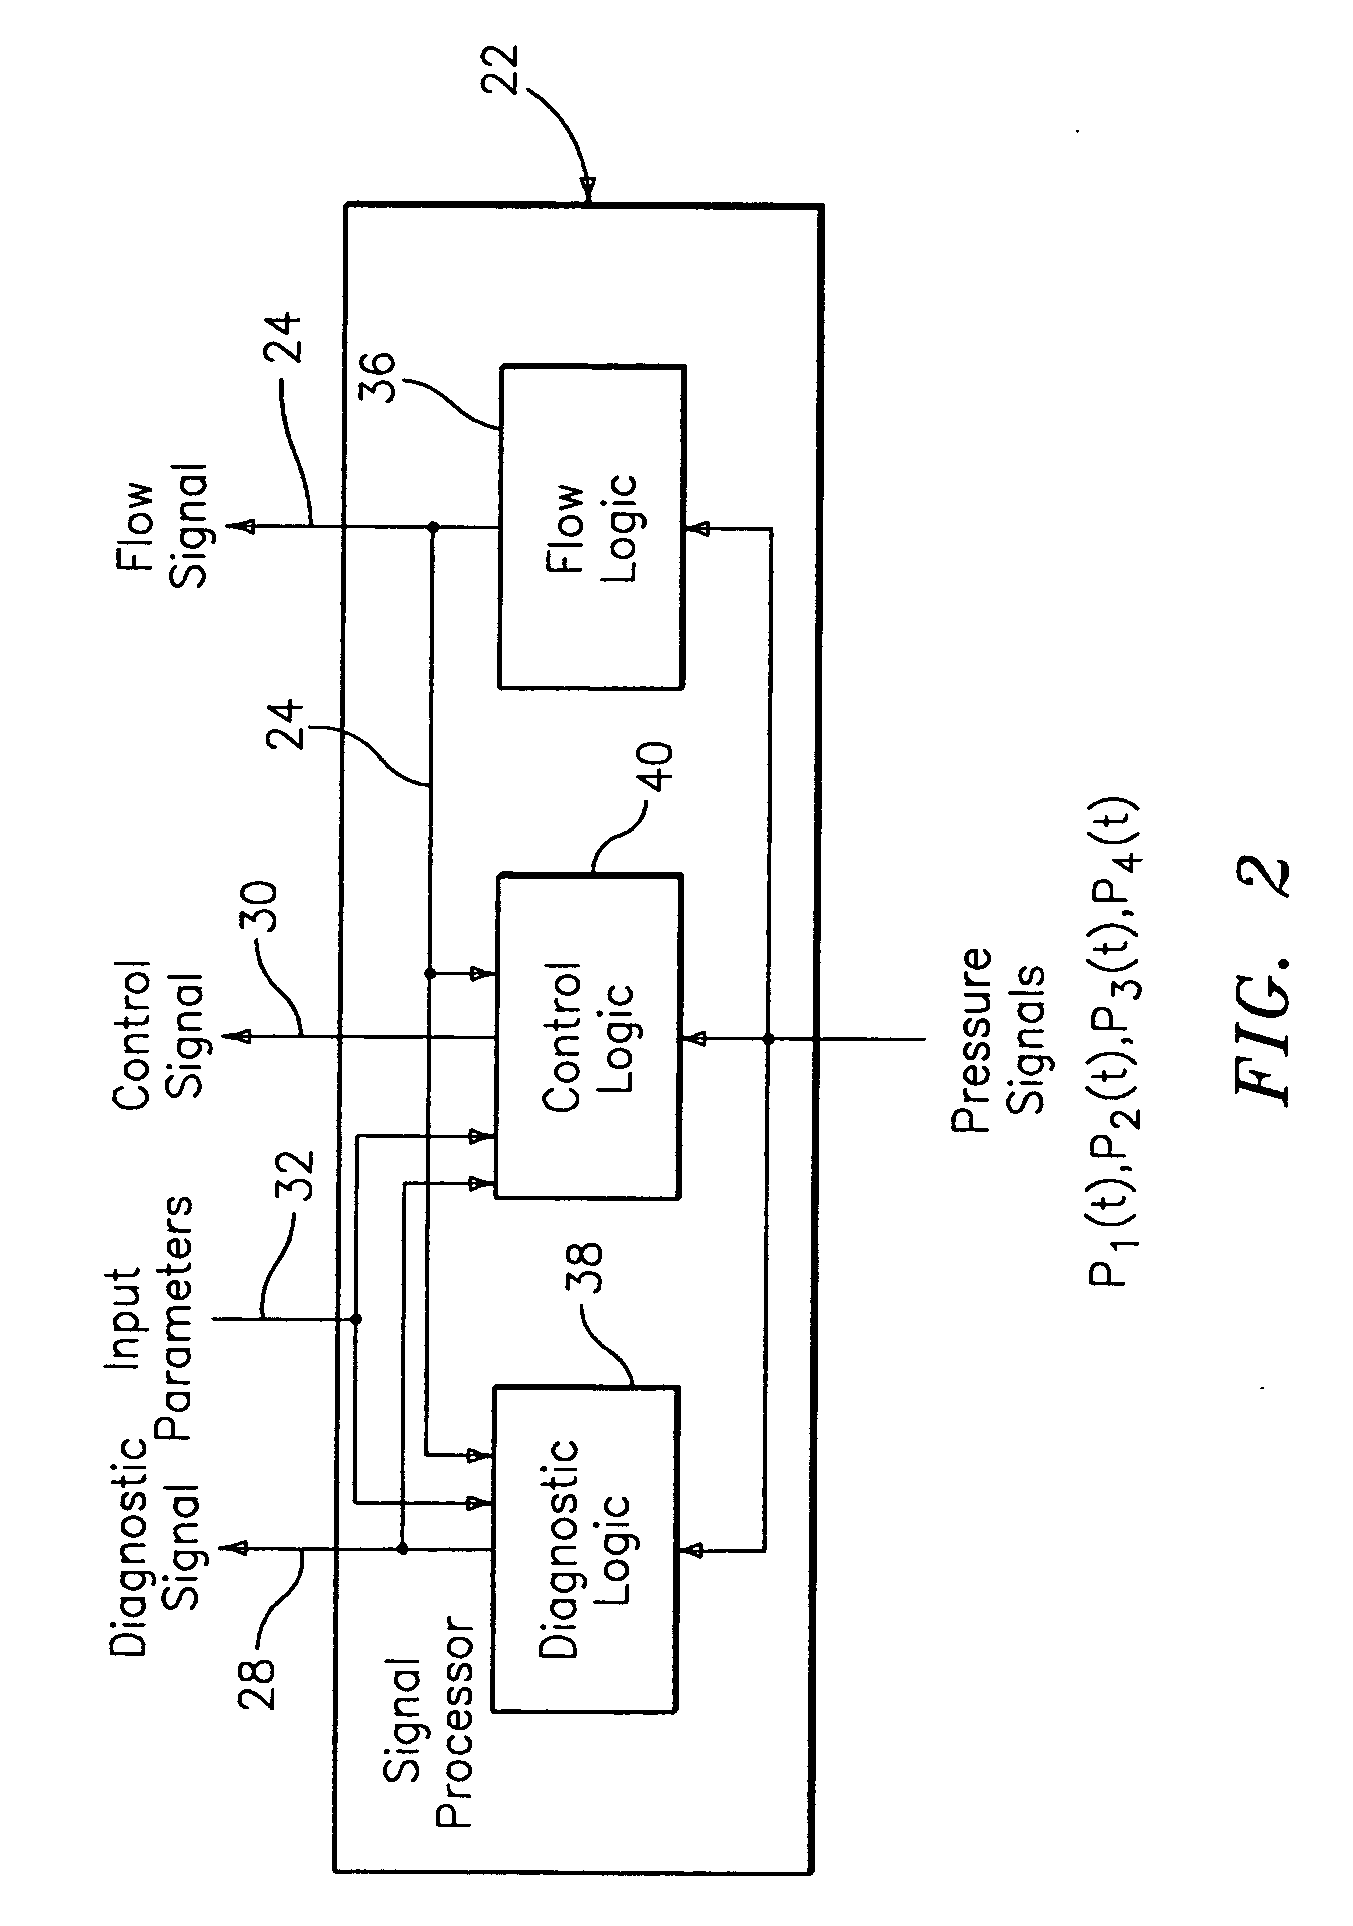 System and method for operating a flow process